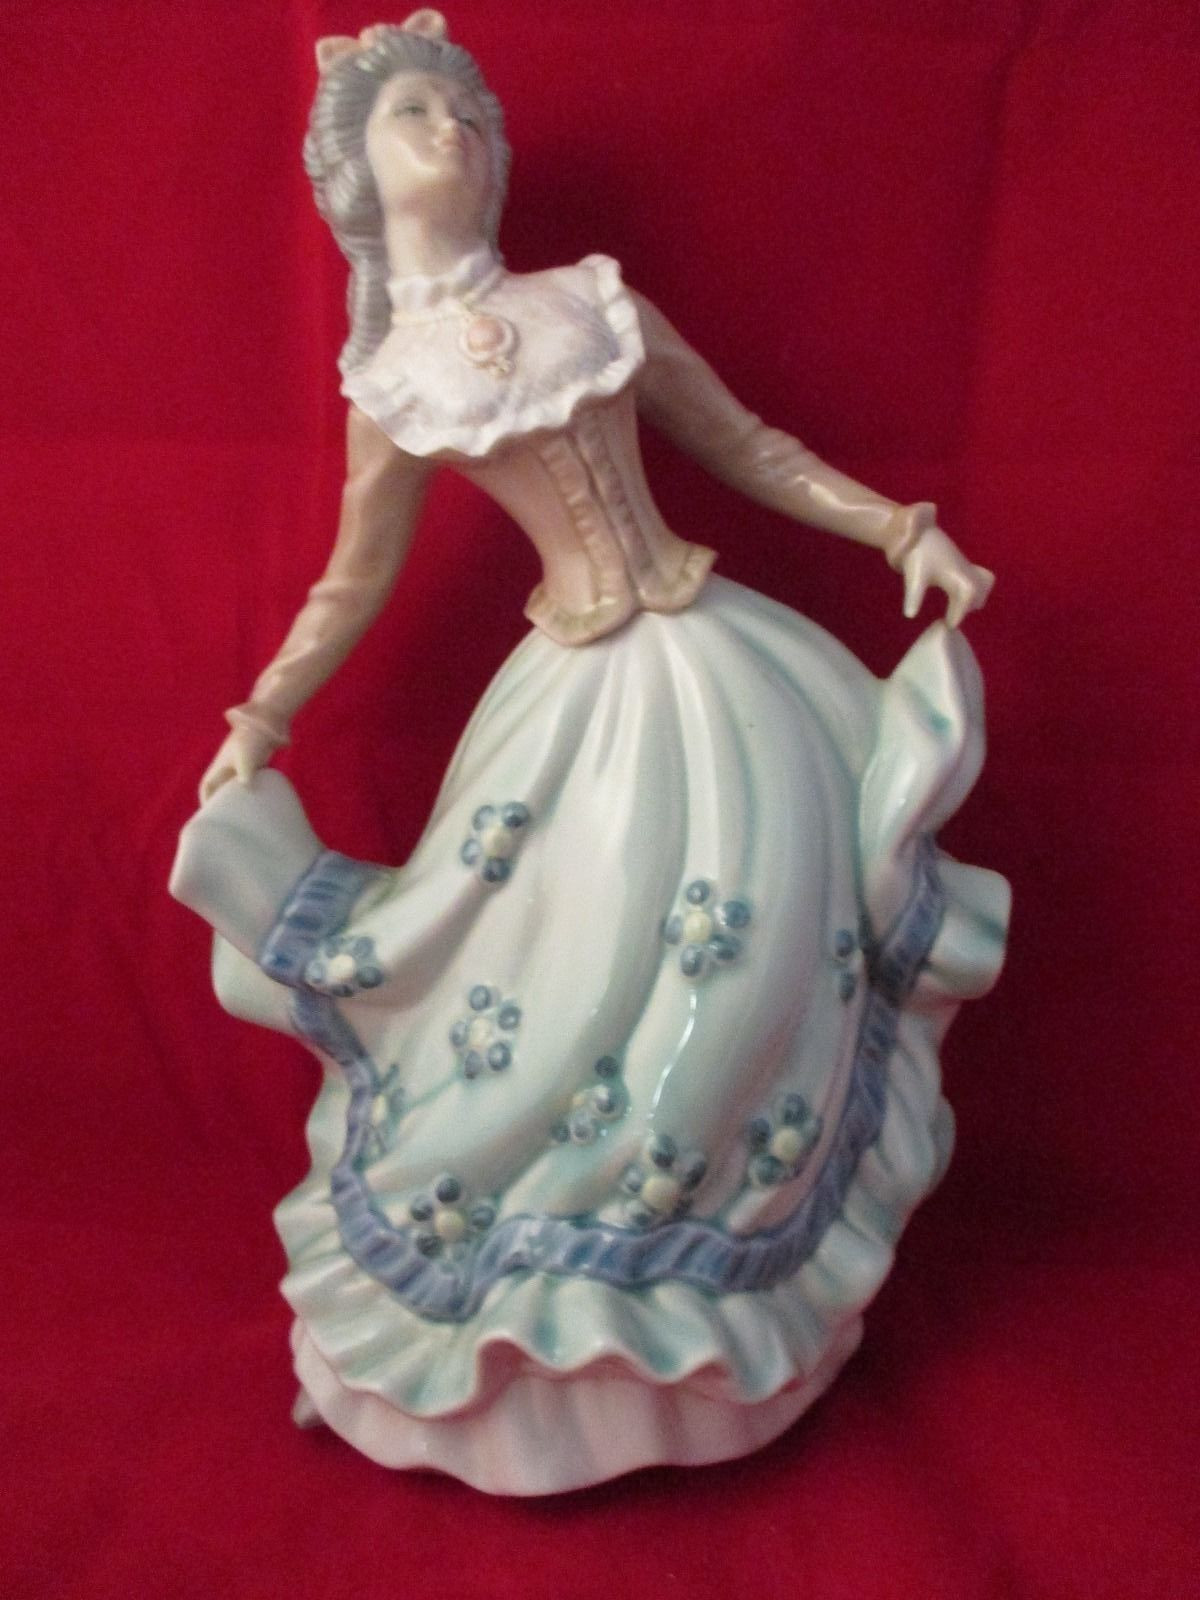 11 Trendy Lladro Bird Scene Vase 2024 free download lladro bird scene vase of rare large vintage tenora colonial lady fine porcelain figurine with regard to rare large vintage tenora colonial lady fine porcelain figurine made in spain figurin